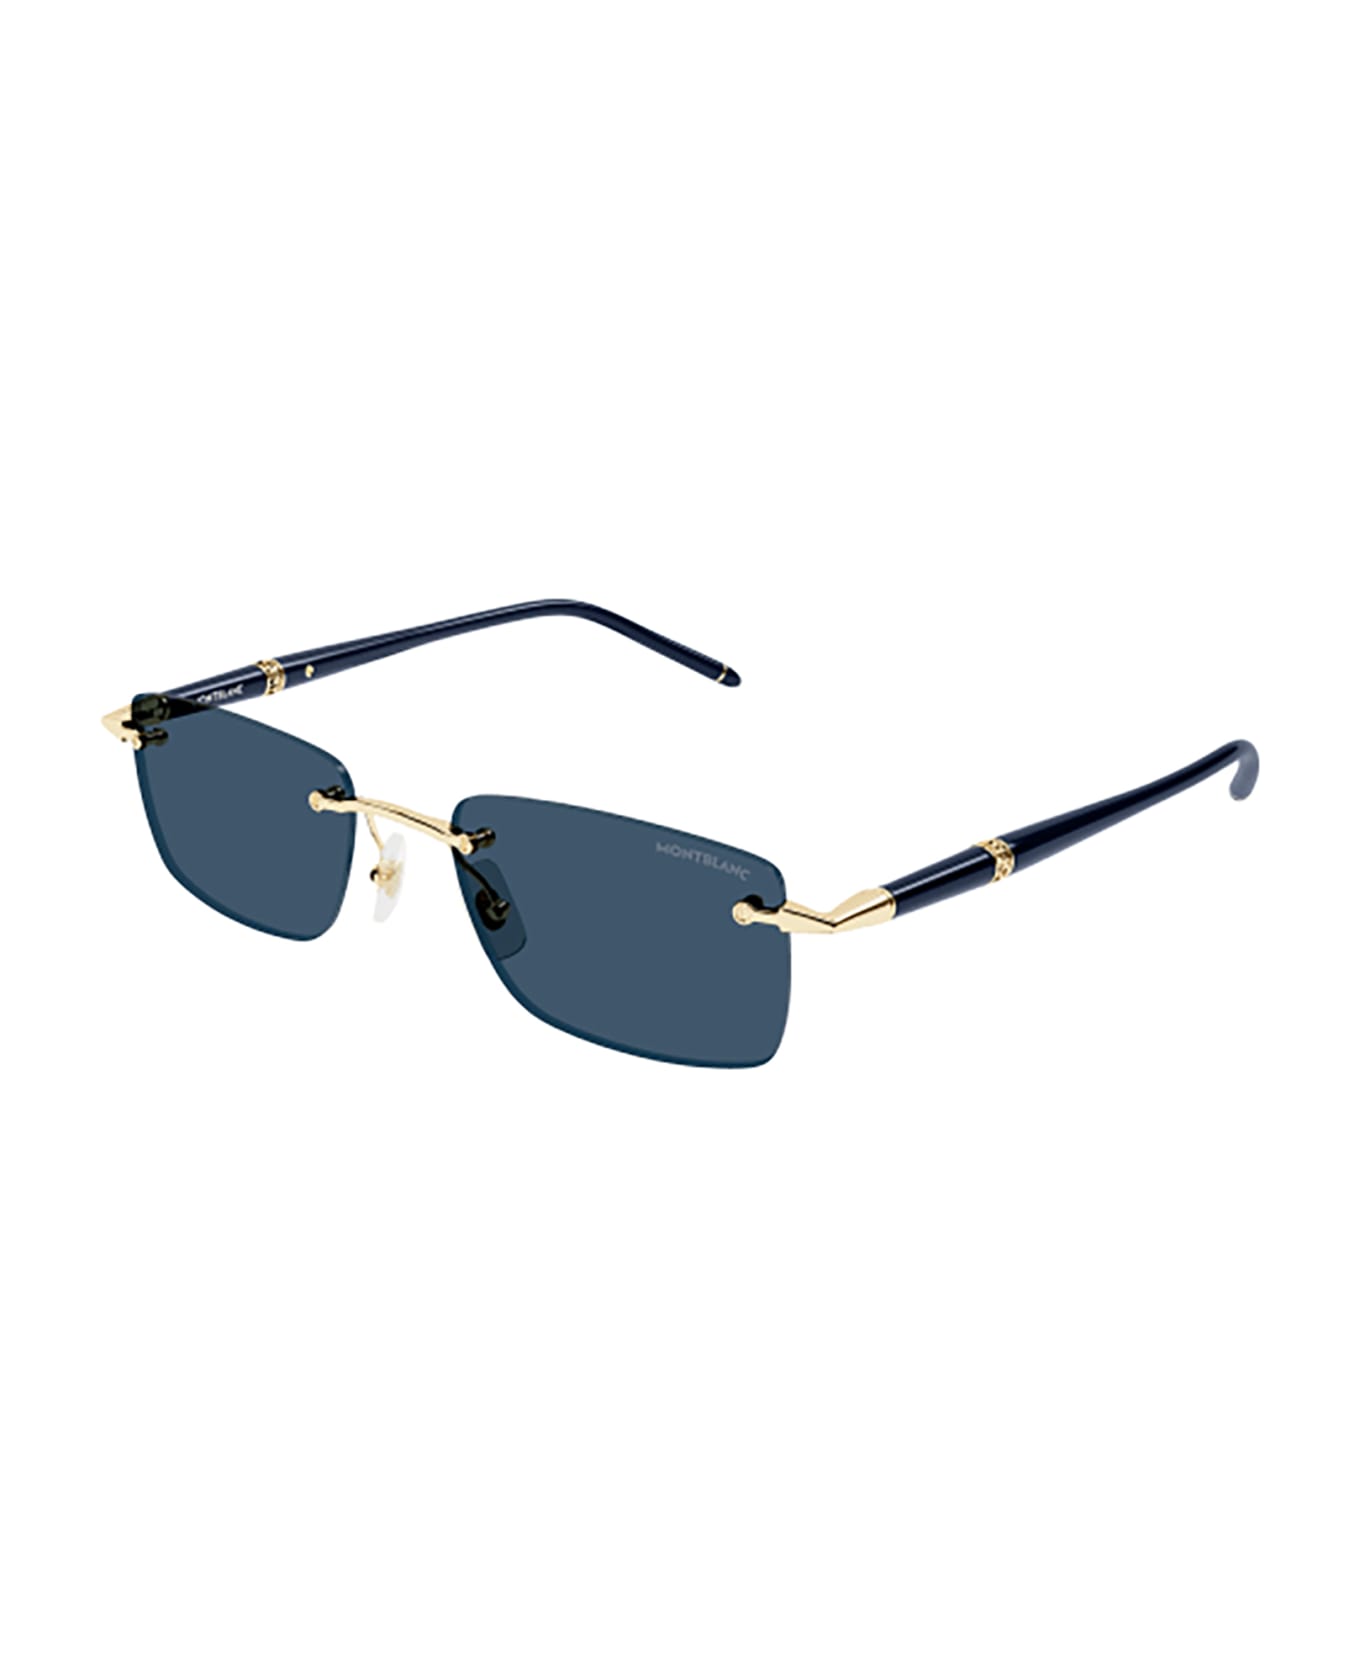 Montblanc MB0344S Sunglasses - the Model 2 sunglasses from Swedish label